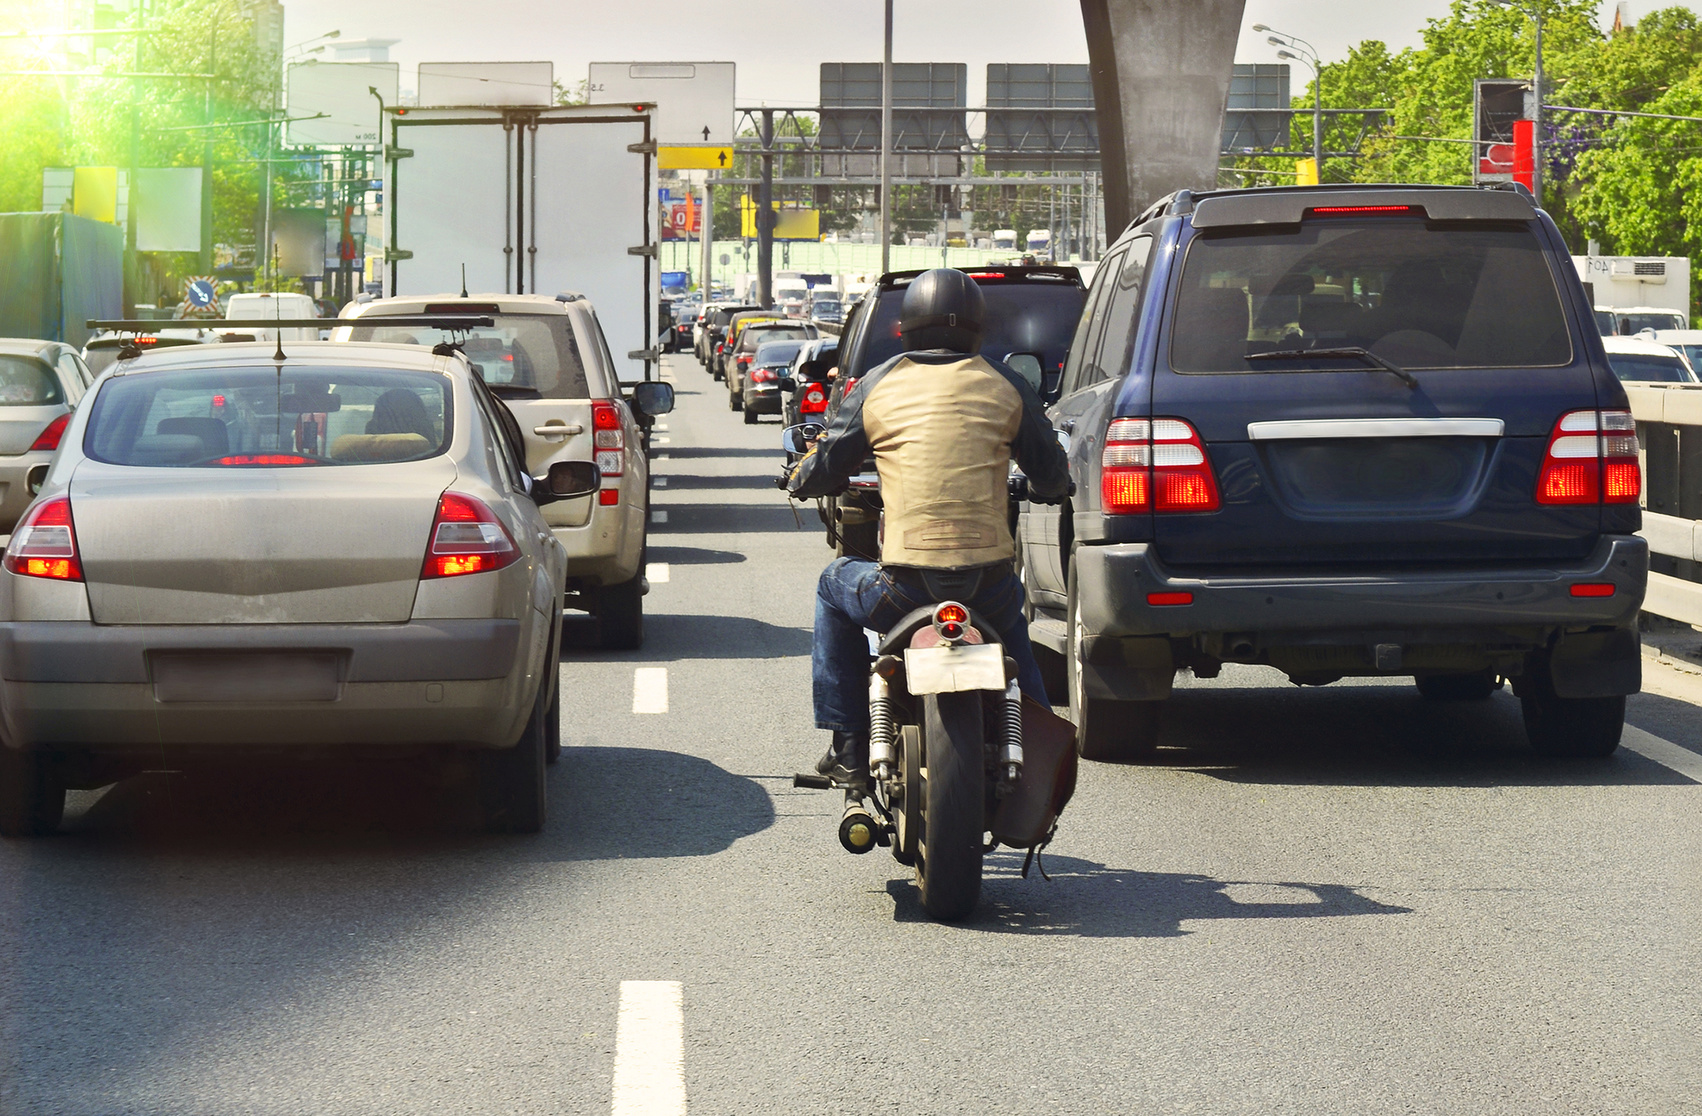 Common Causes for Motorcycle Accidents